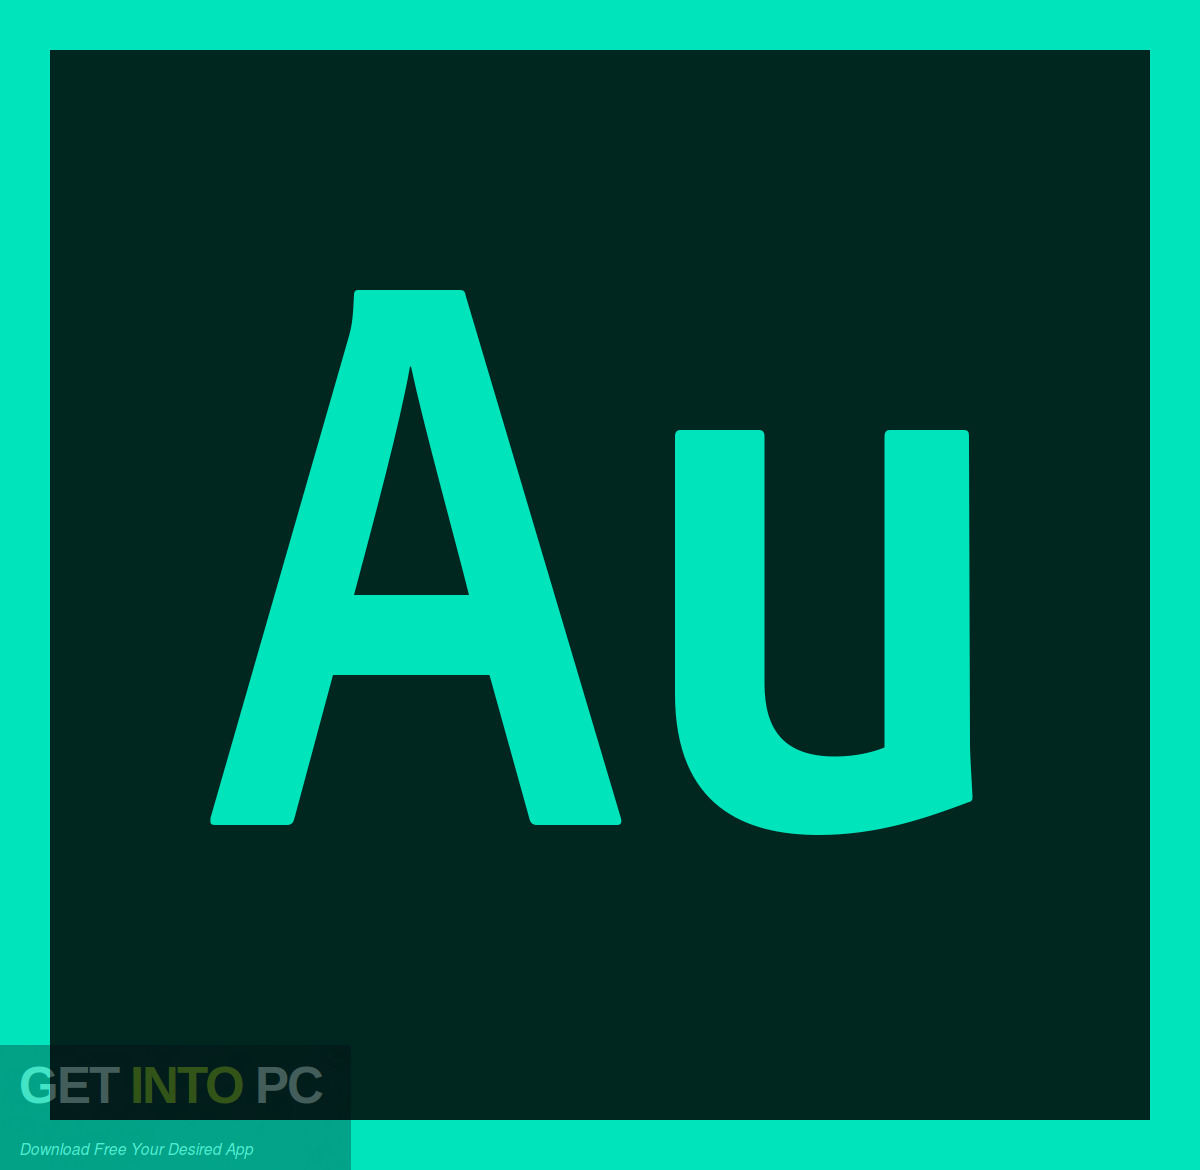 Adobe audition full version free download for windows 8 adobe reader free download windows 7 32bit